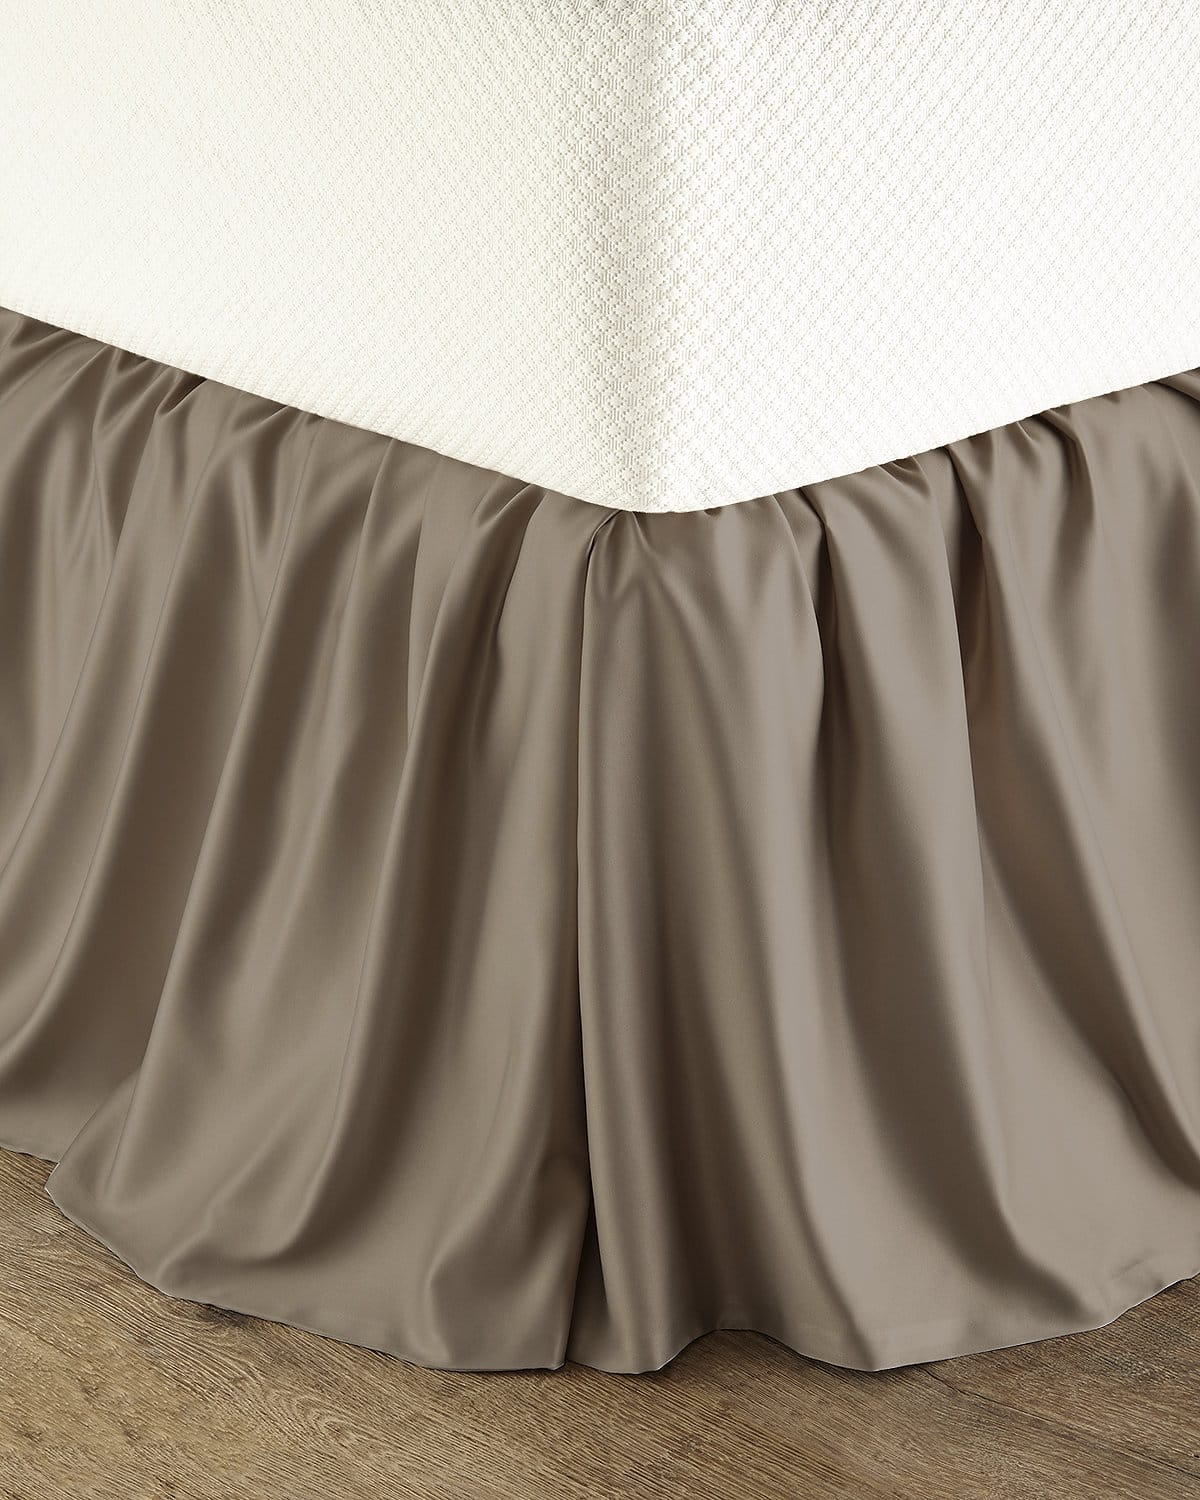 Lili Alessandra Queen/king Dust Skirt In Fawn